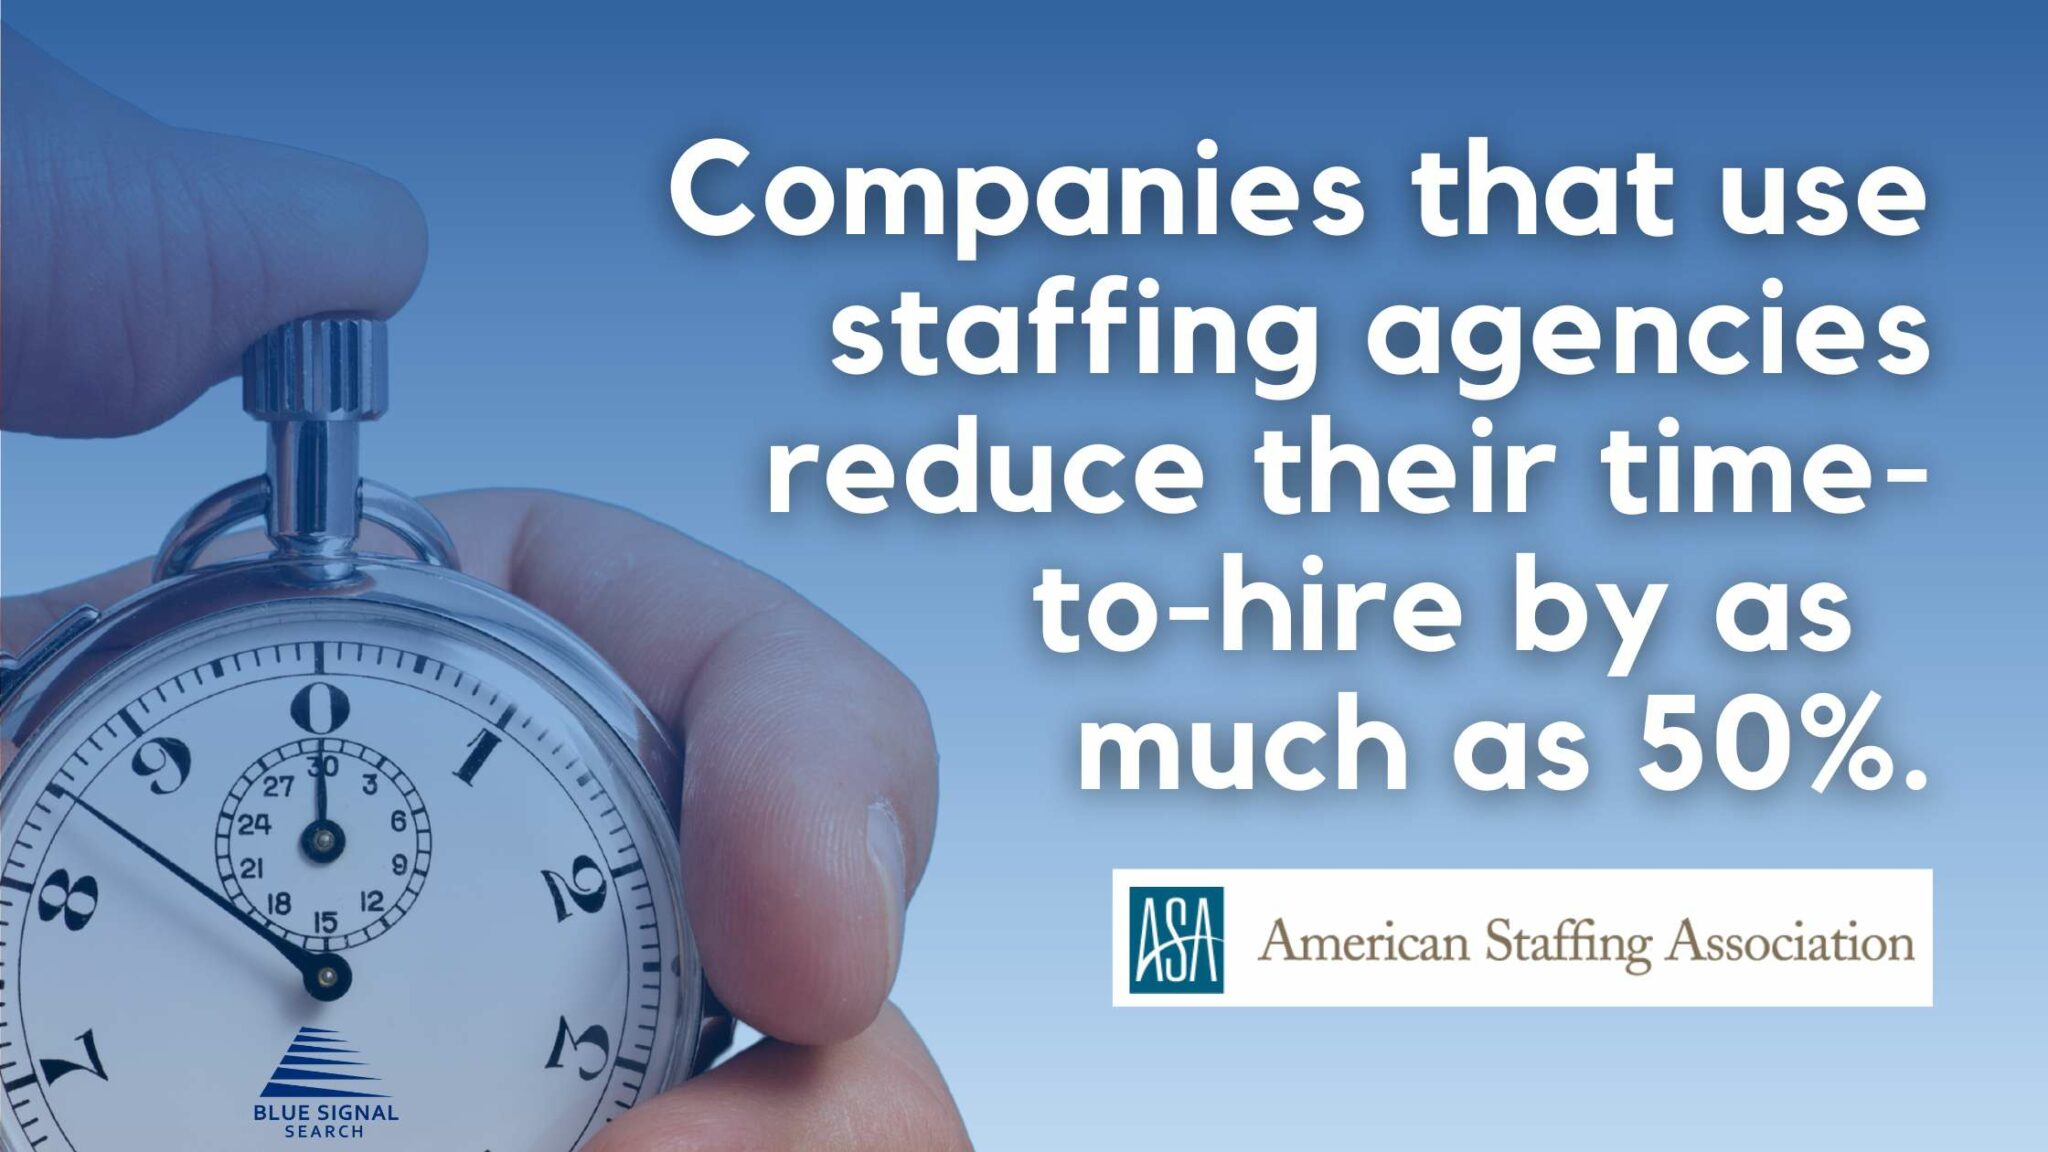 Text over an image of a hand holding a stopwatch. Text states "Companies that use staffing agencies reduce their time-to-hire by as much as 50%."